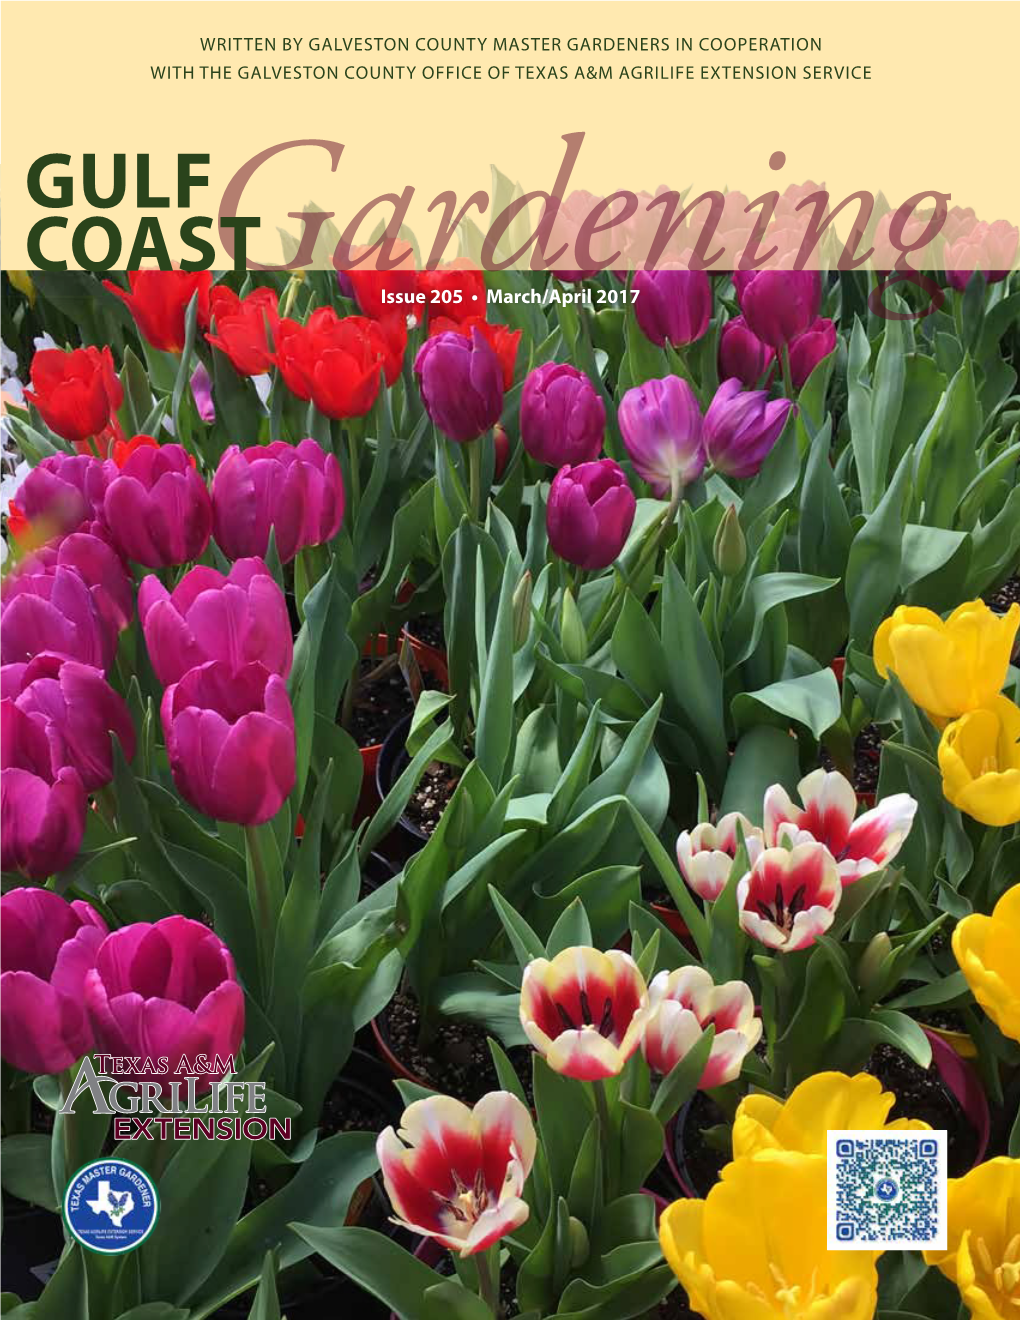 GULF COAST Gardeningissue 205 • March/April 2017 2017 Master Gardener You Might Be a Master Gardener If: Ing Methods If the Old Ones Are No Longer Fun